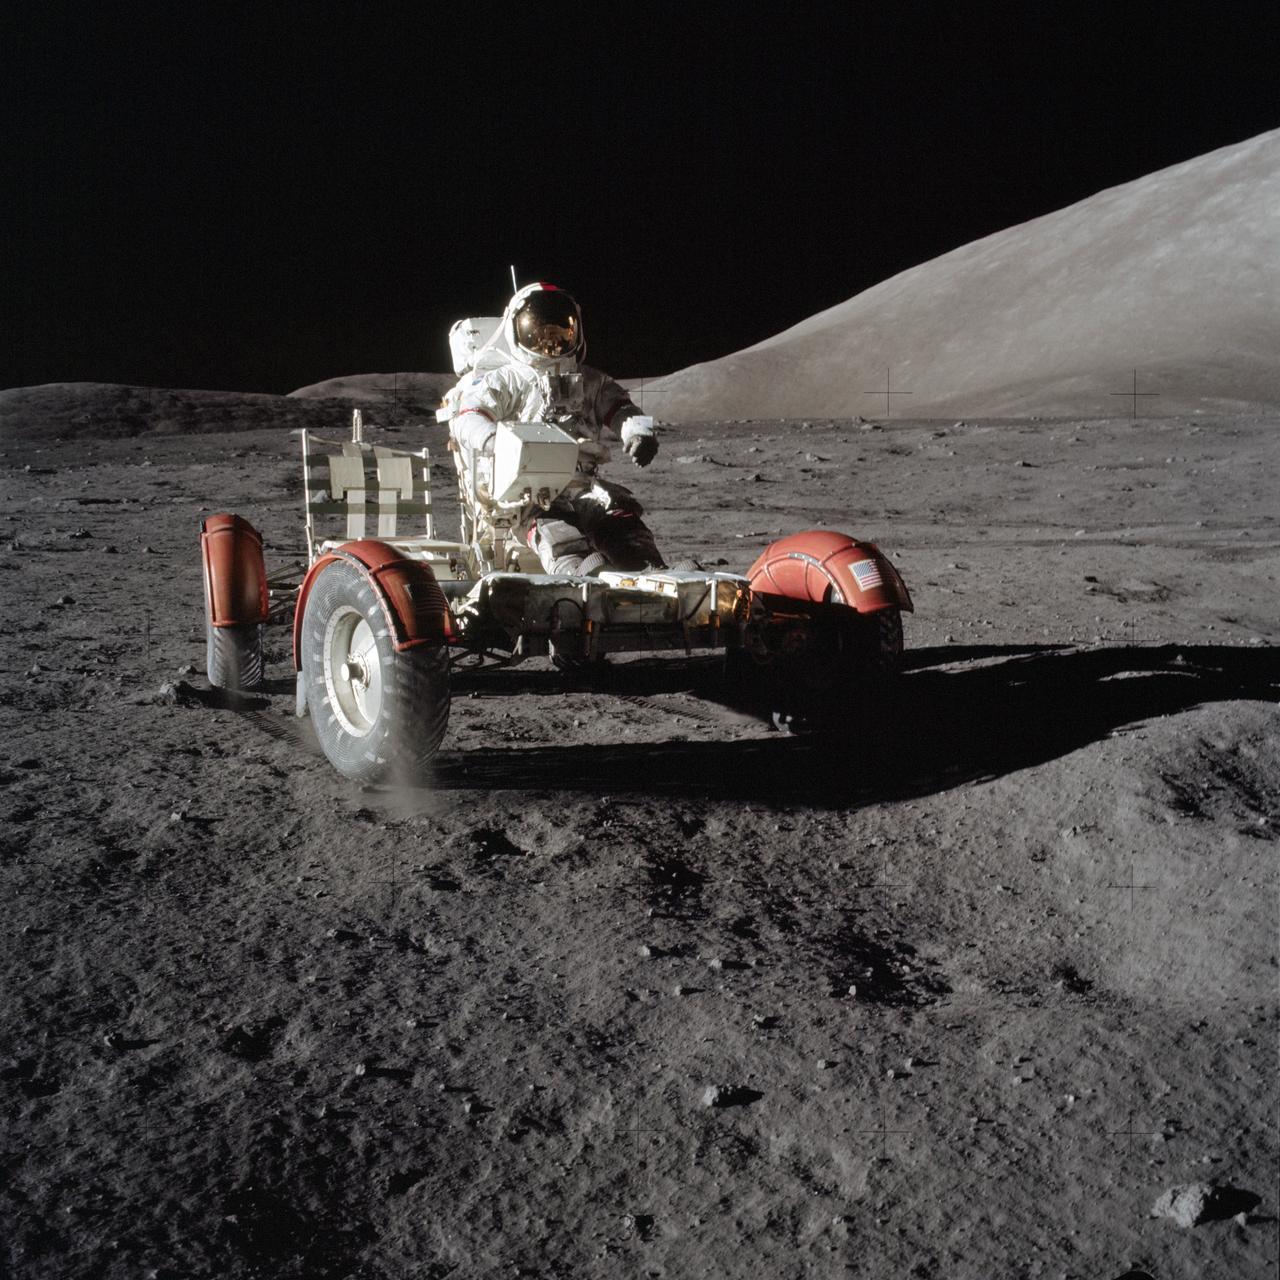 Astronaut Gene Cernan wears a bulky white space suit with a gold visor. He is sitting in the Lunar Roving Vehicle (LRV), a car-like open vehicle with large, round tires and red-orange fenders. It sits on the surface of the gray, dusty Moon. The mountain sloping upward in the right background is the east end of South Massif. Credit: NASA